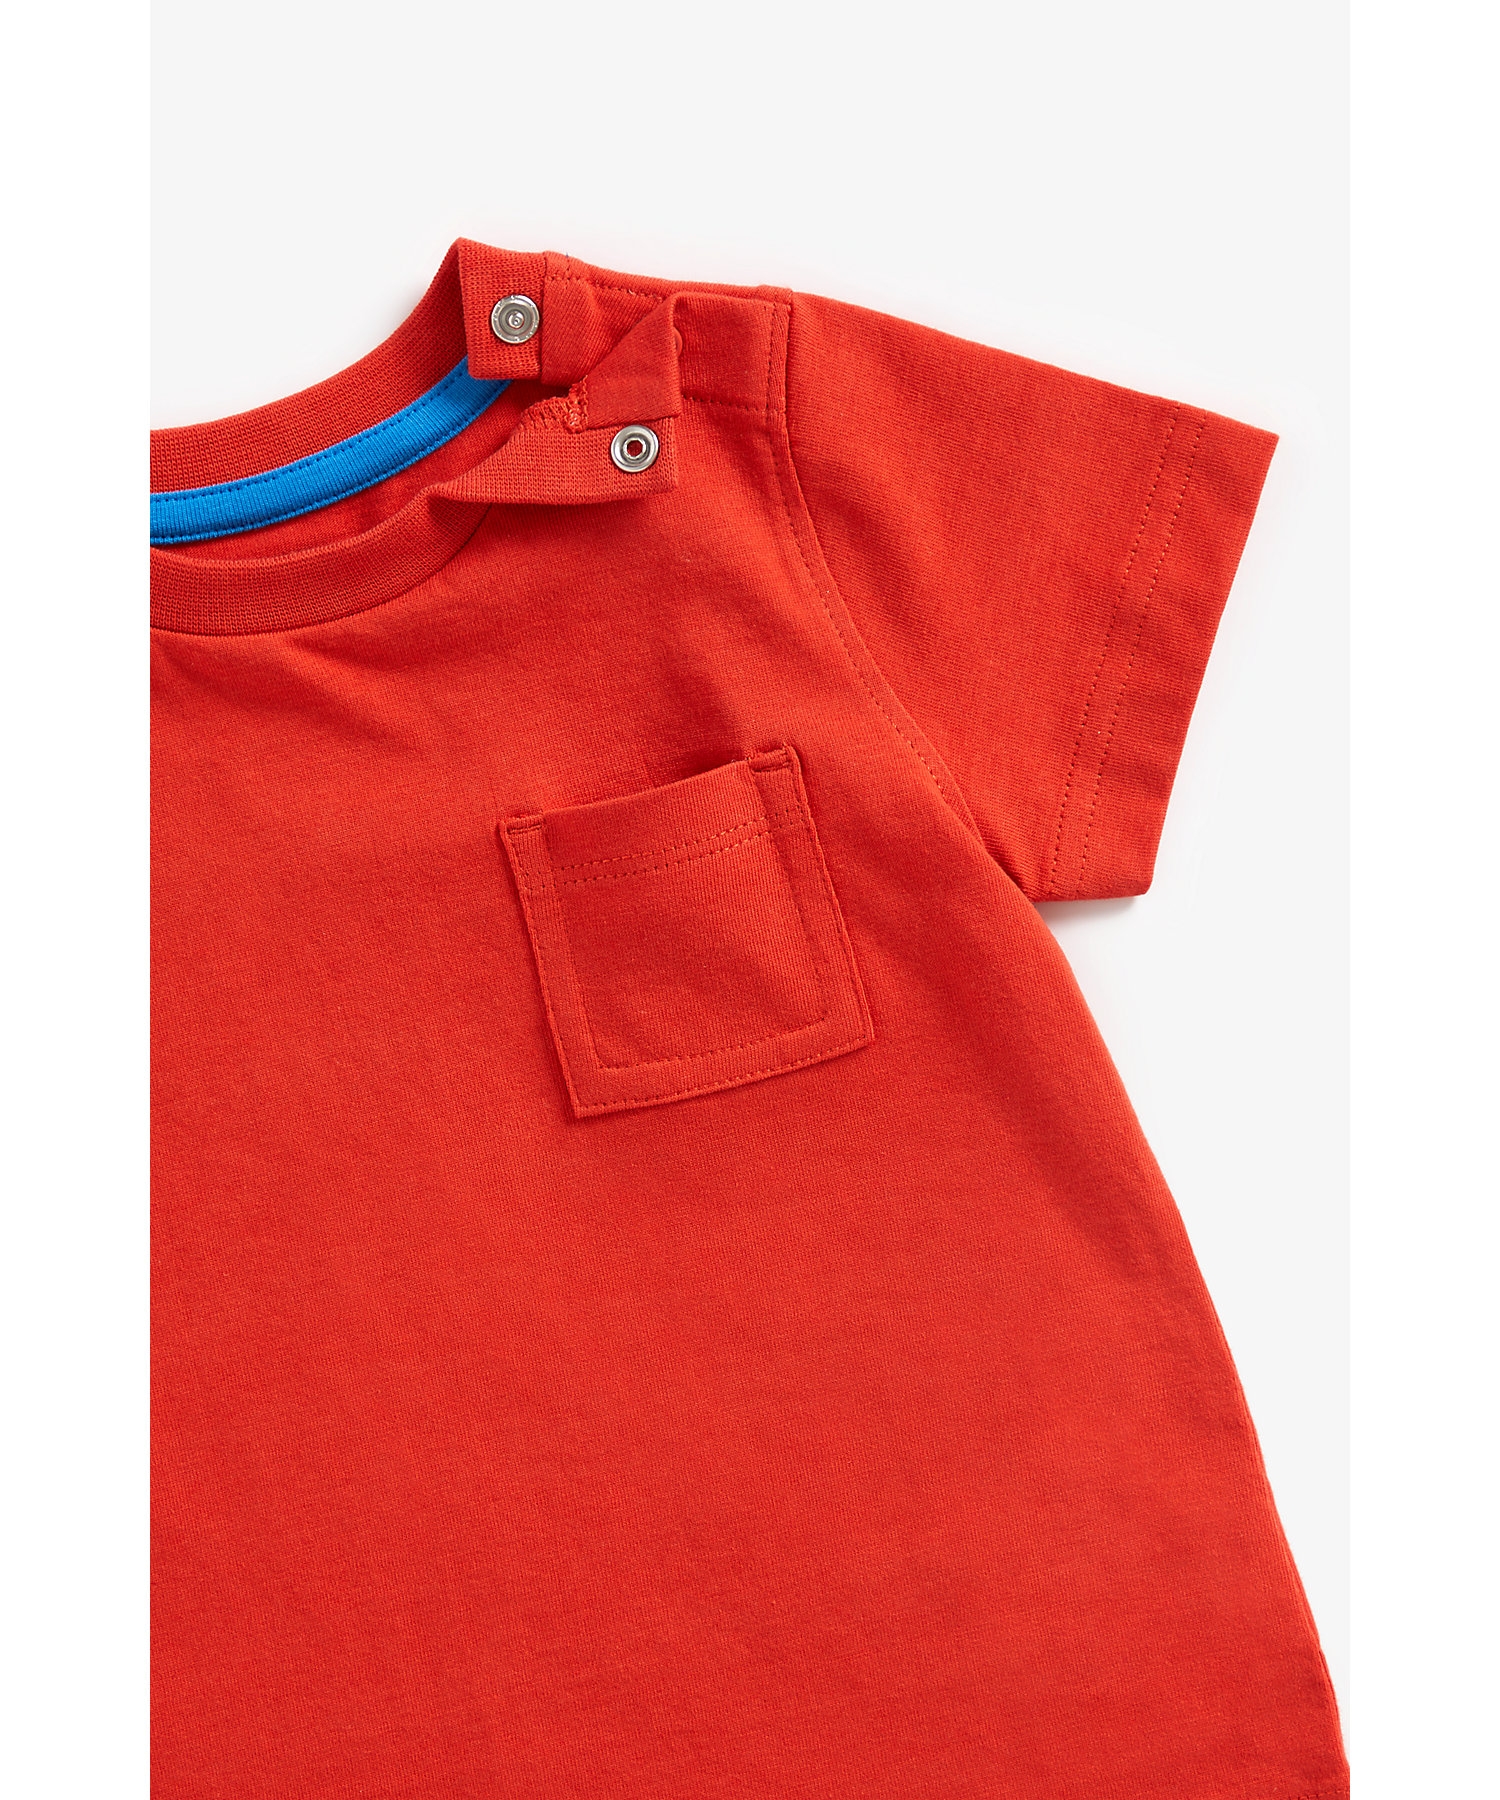 Mothercare | Boys Short Sleeves T-Shirt -Pack of 3-Multicolor 6